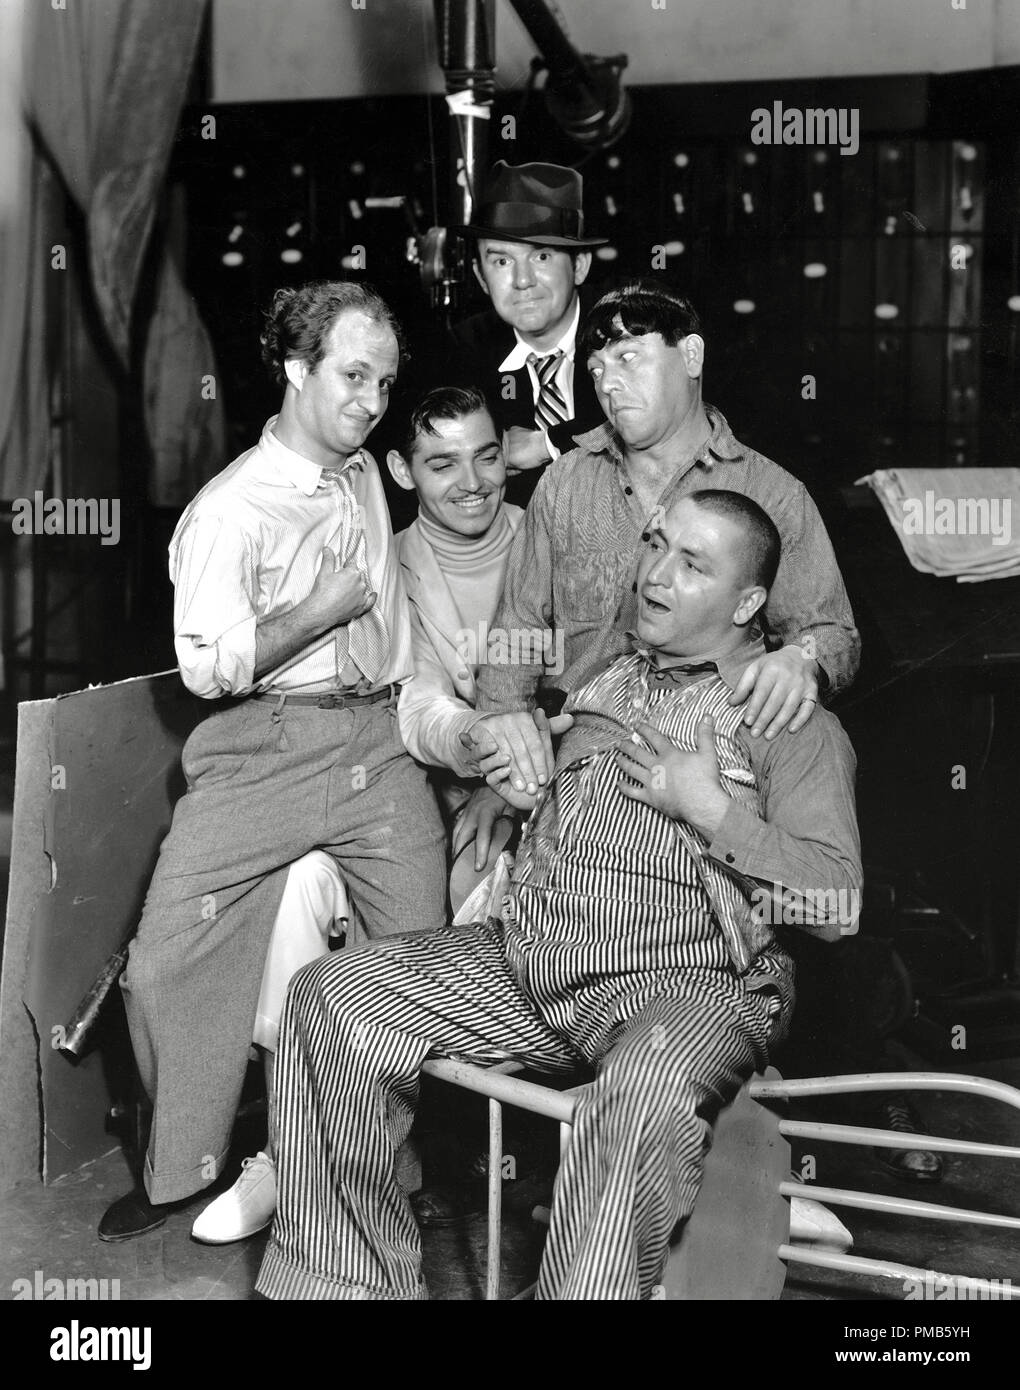 Clark Gable, Ted Healy and the Three Stooges, 'The Dancing Lady' (1933) MGM  File Reference # 33536 743THA  For Editorial Use Only -  All Rights Reserved Stock Photo